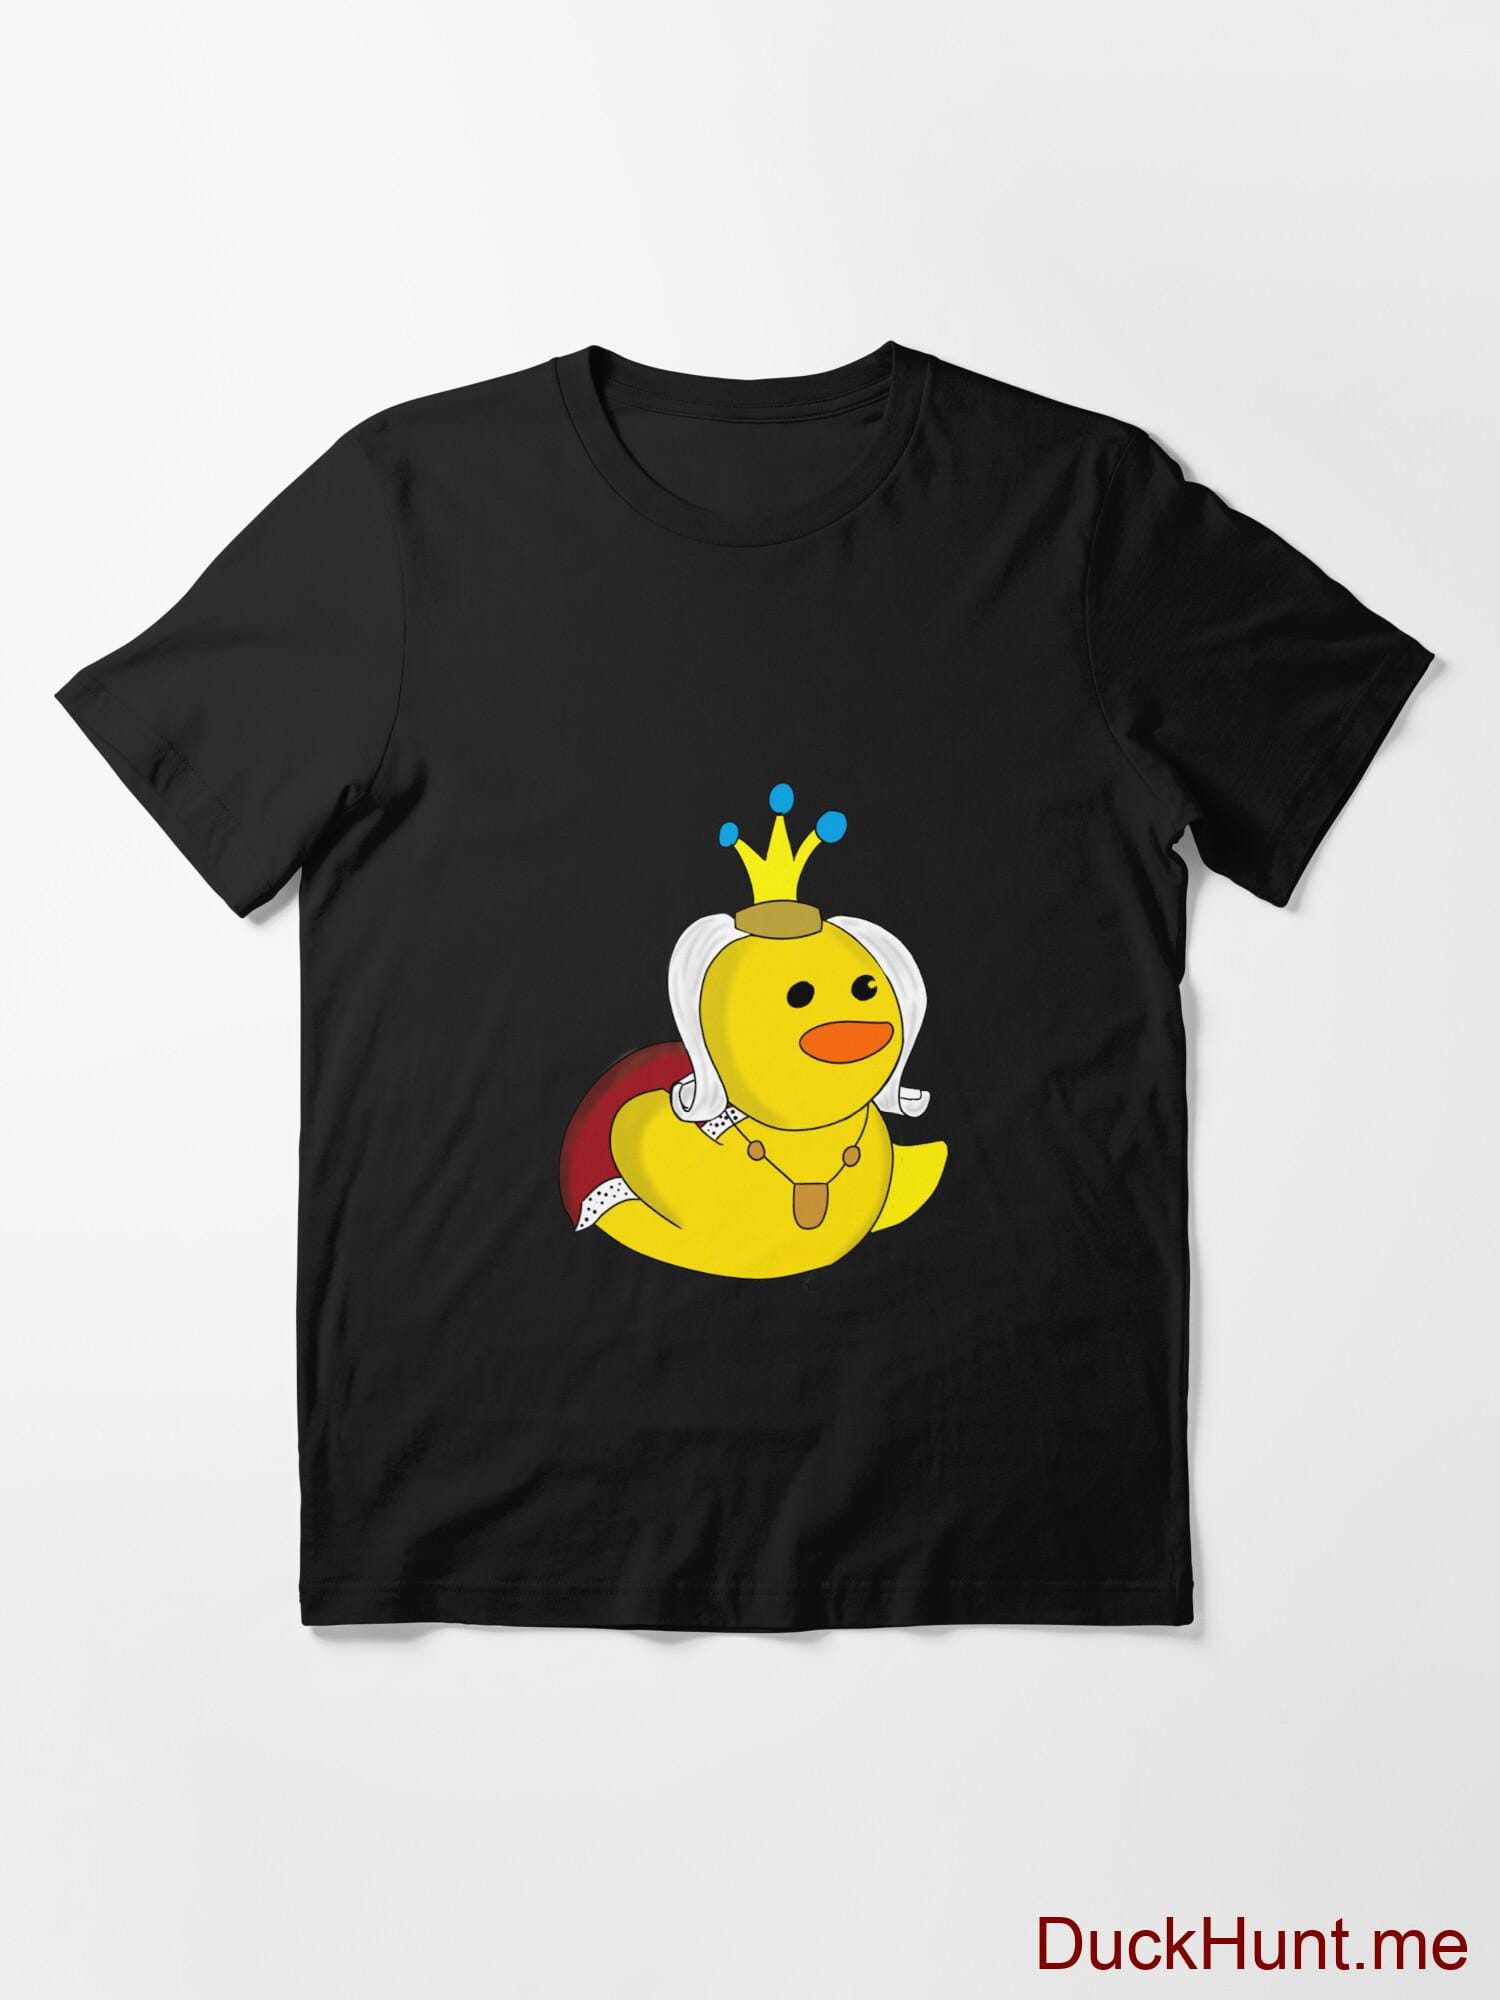 Royal Duck Black Essential T-Shirt (Front printed) alternative image 2